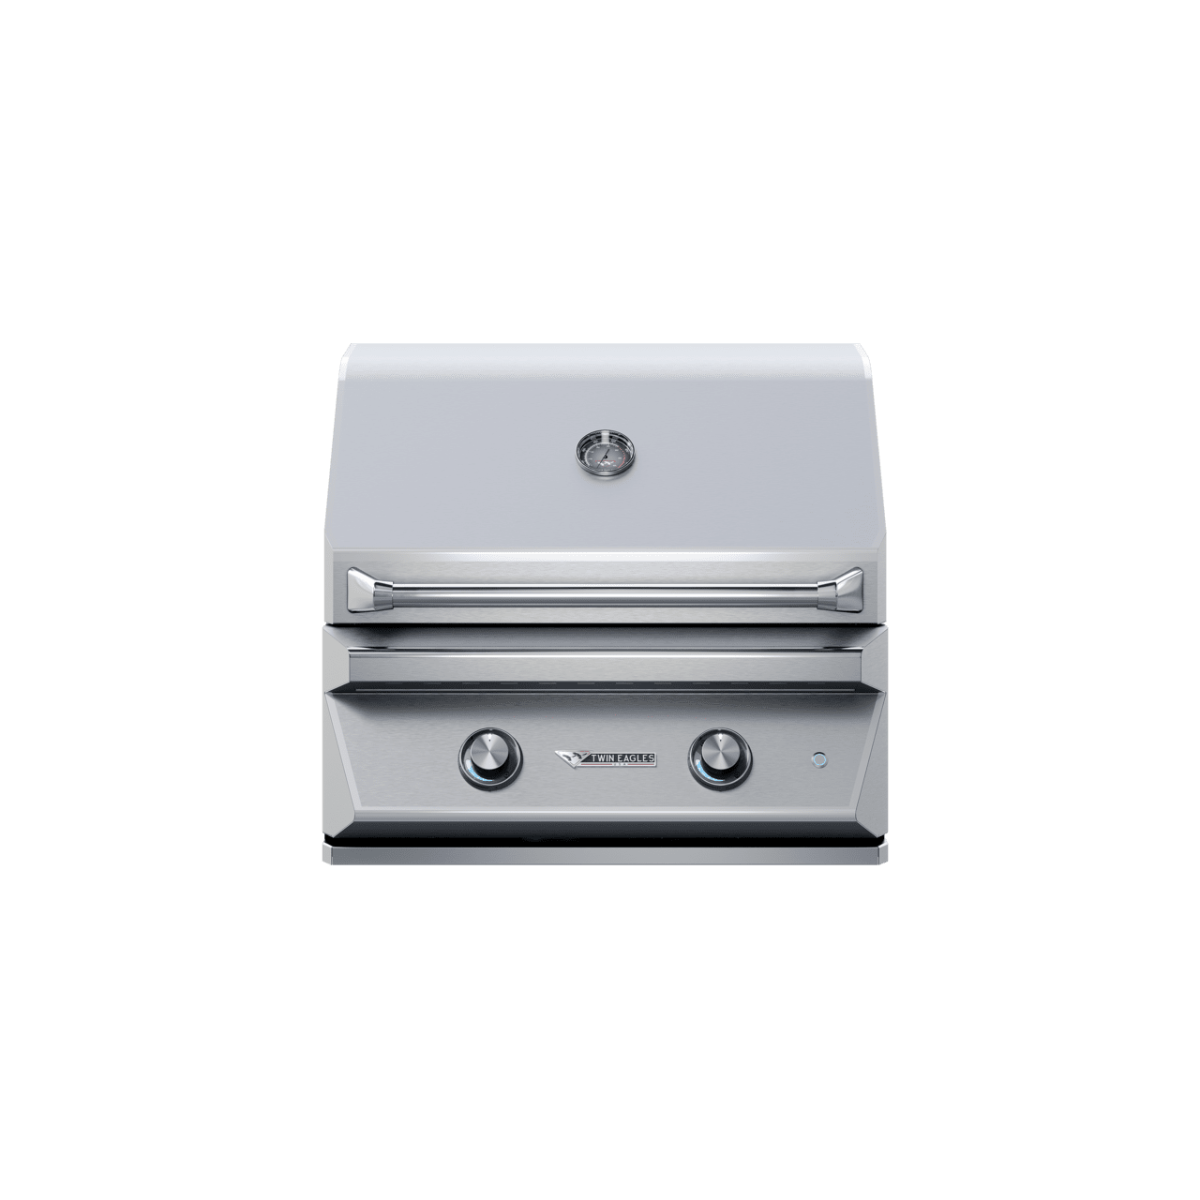 Front view of a modern, stainless steel gas grill with a closed lid and two control knobs.